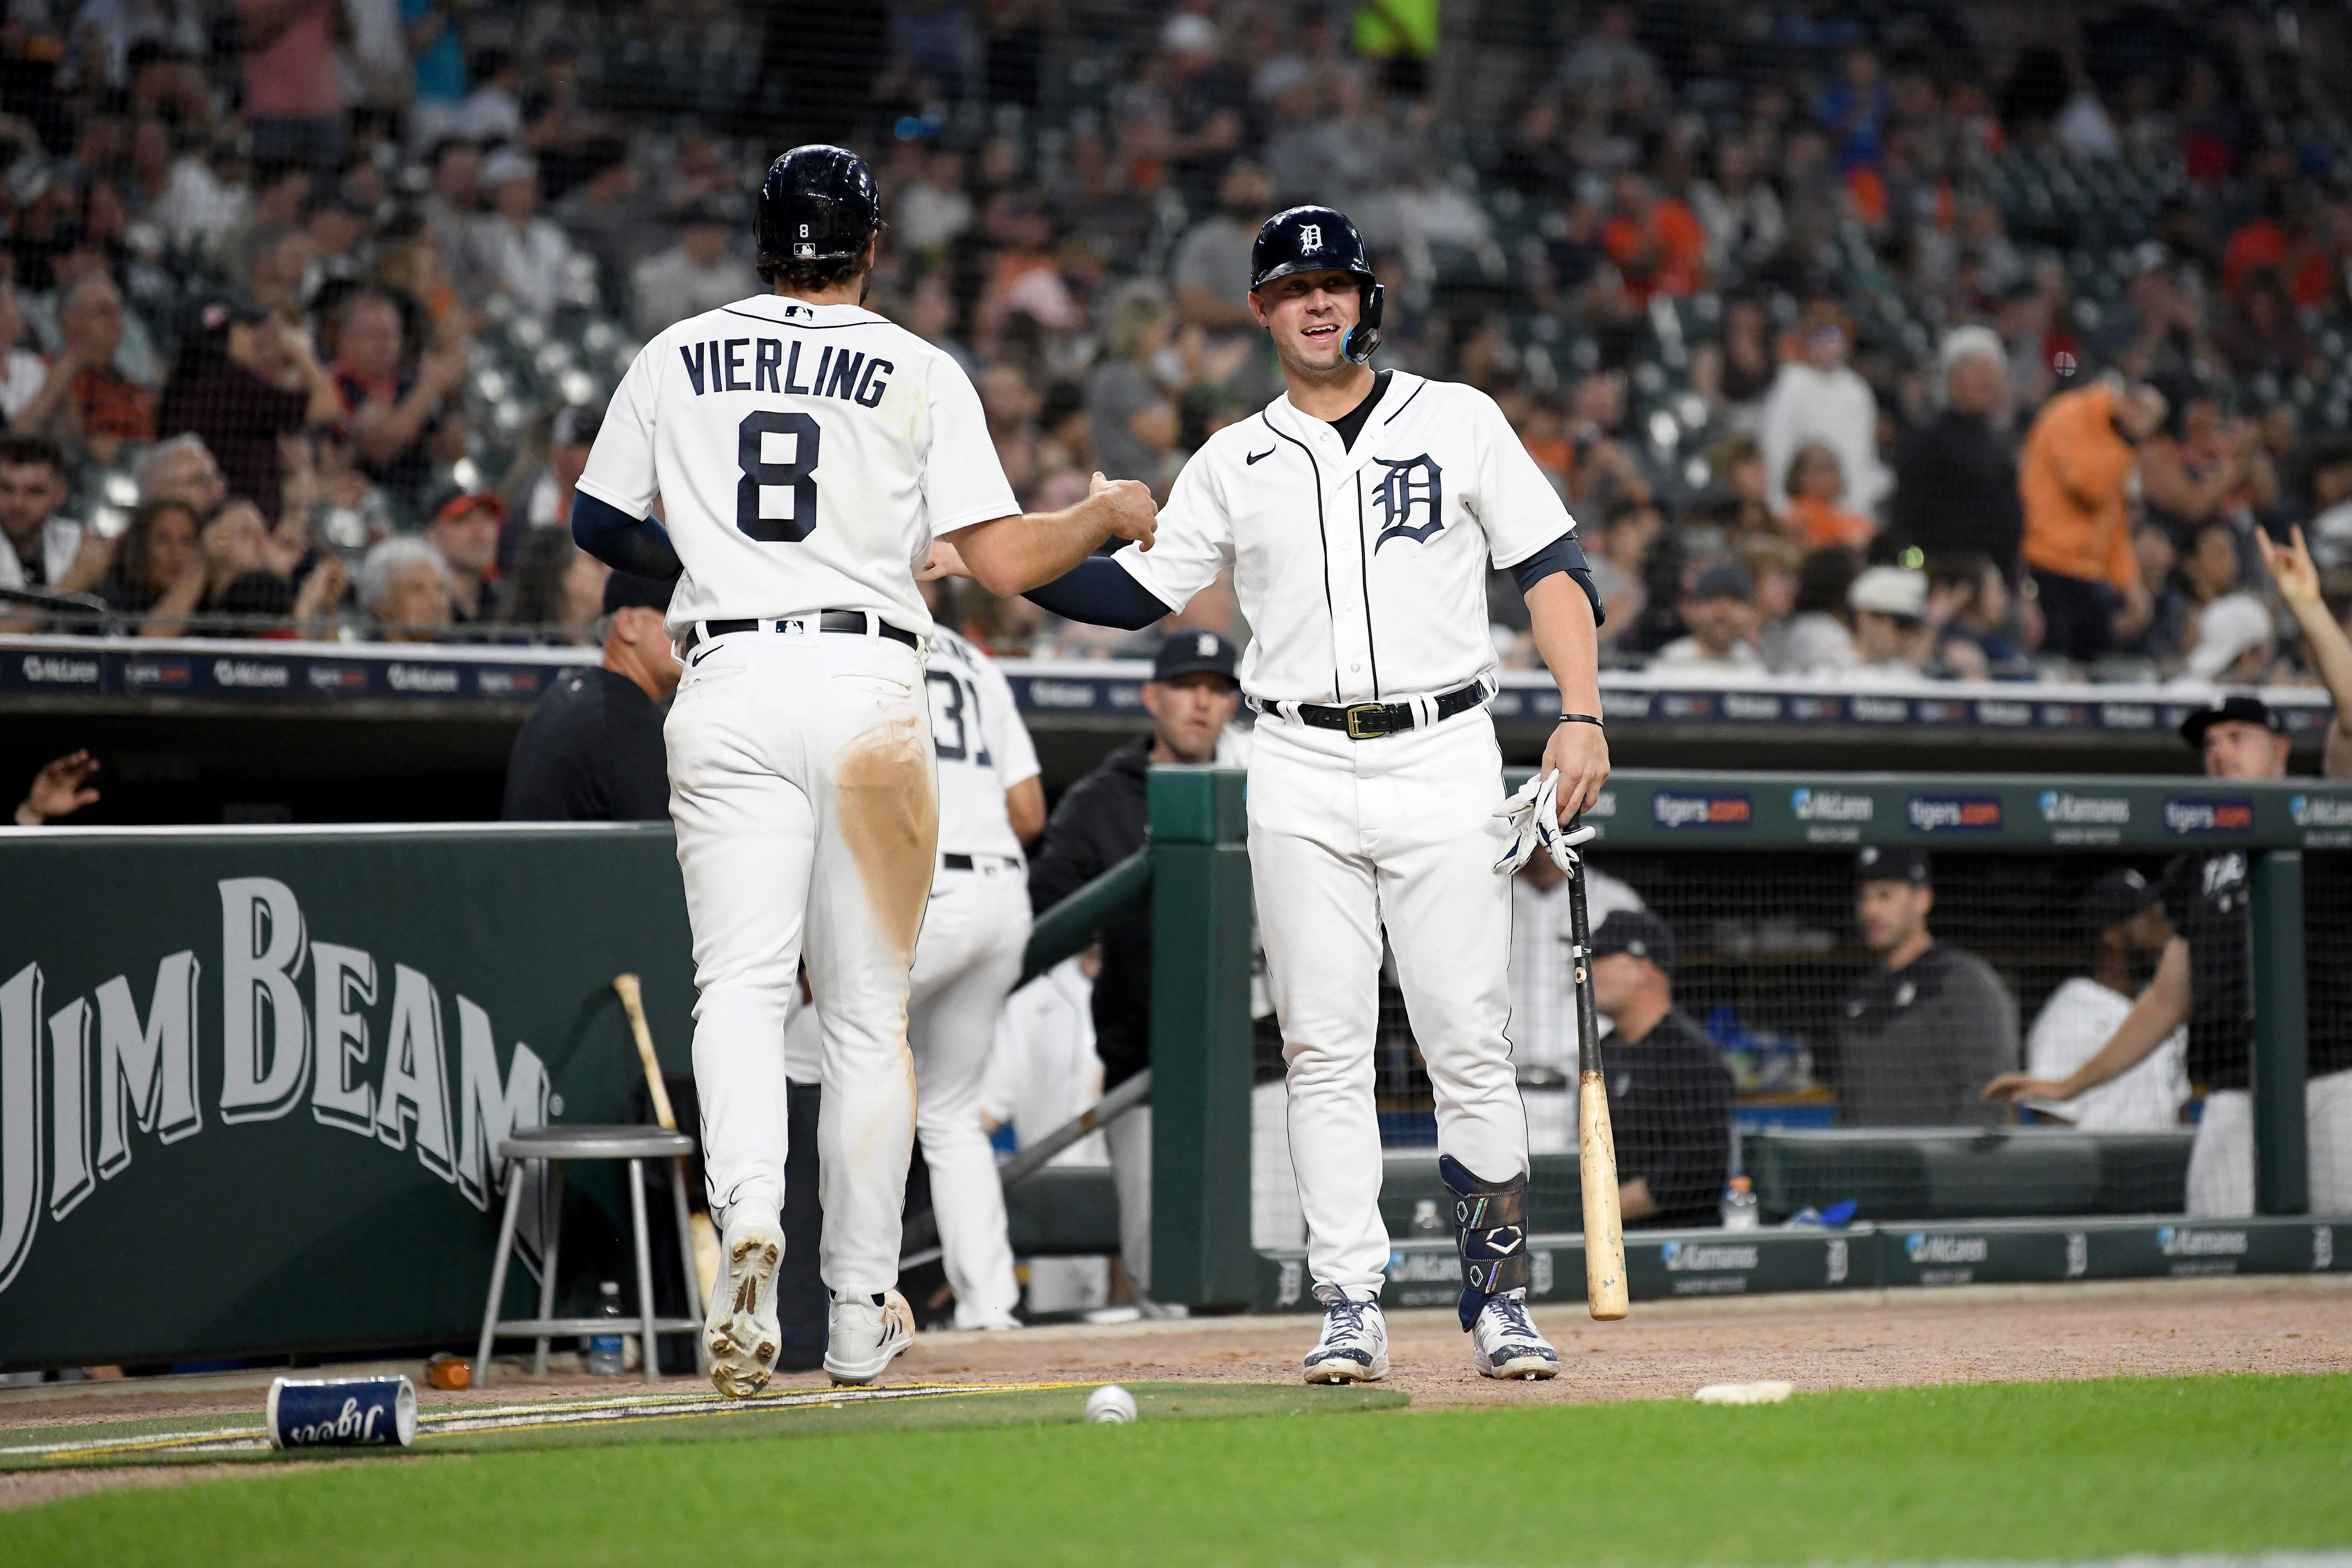 Haase's two-run HR allows Tigers to hold off Giants